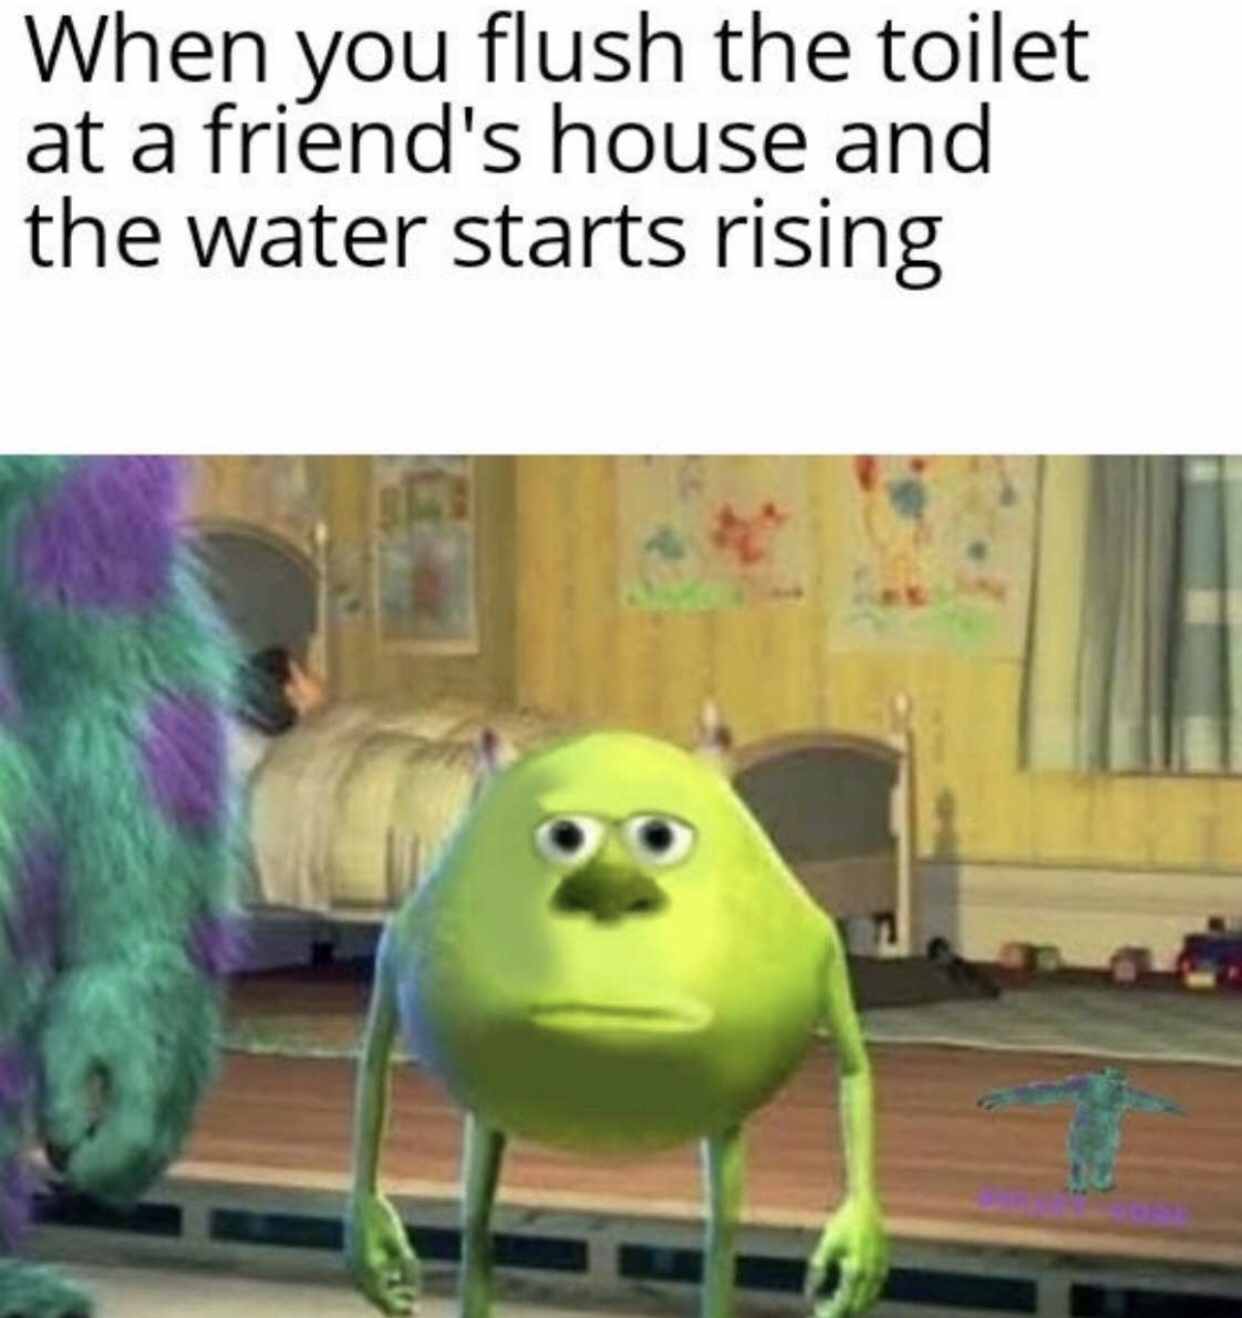 Disney meme - google offers - When you flush the toilet at a friend's house and the water starts rising